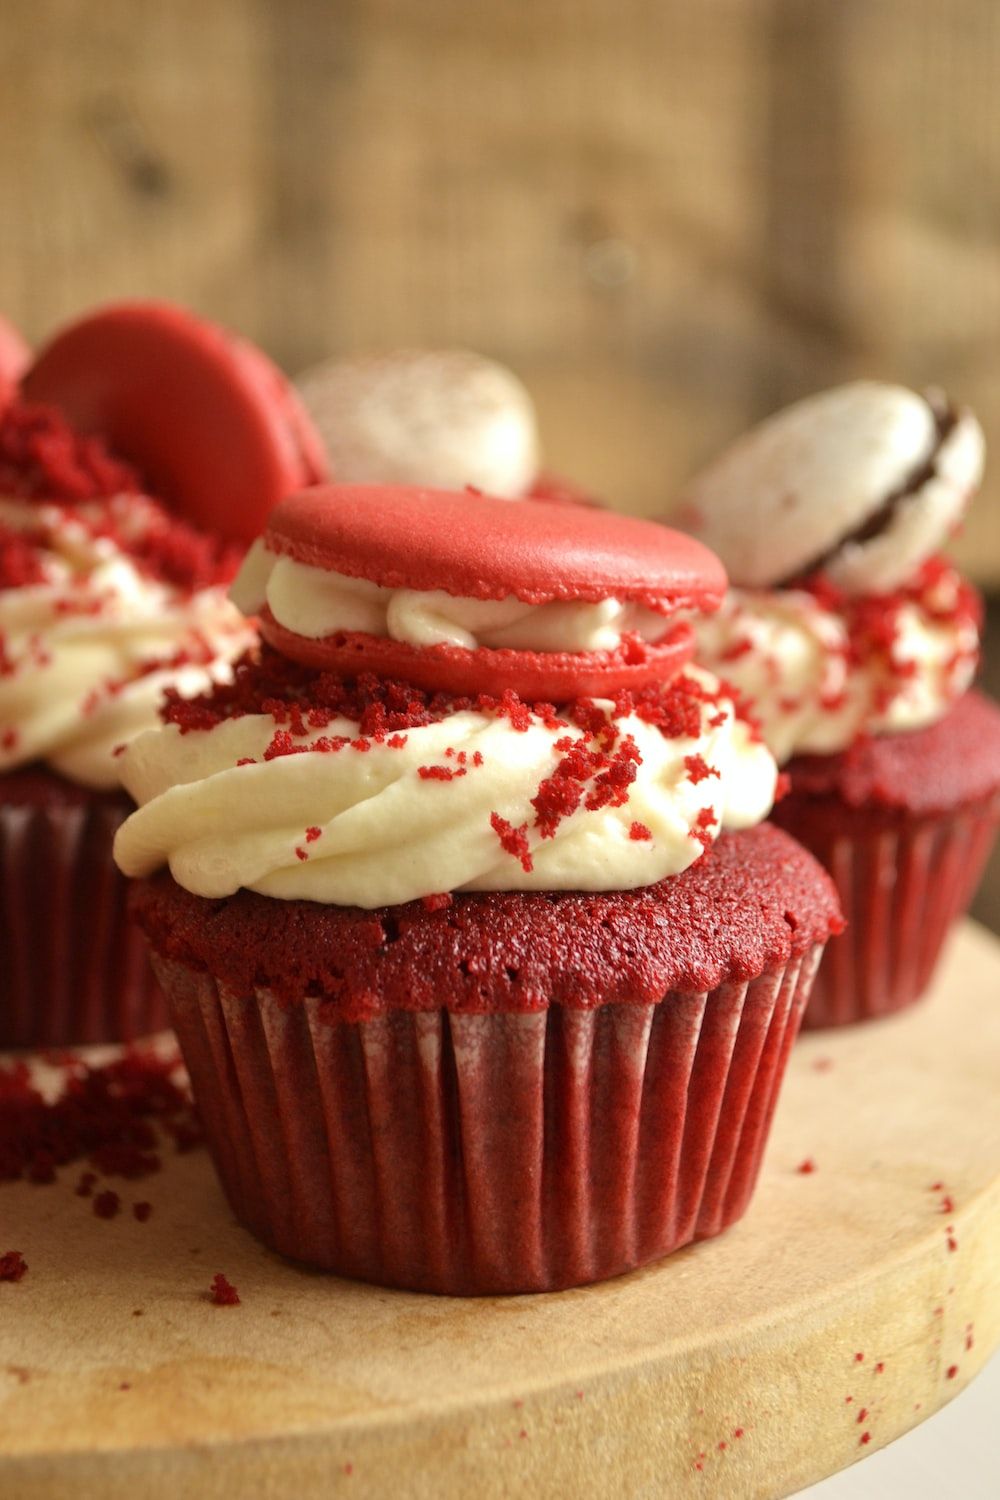 Red velvet cupcakes with a swirl of white frosting and a red velvet macaron on top. - Cupcakes